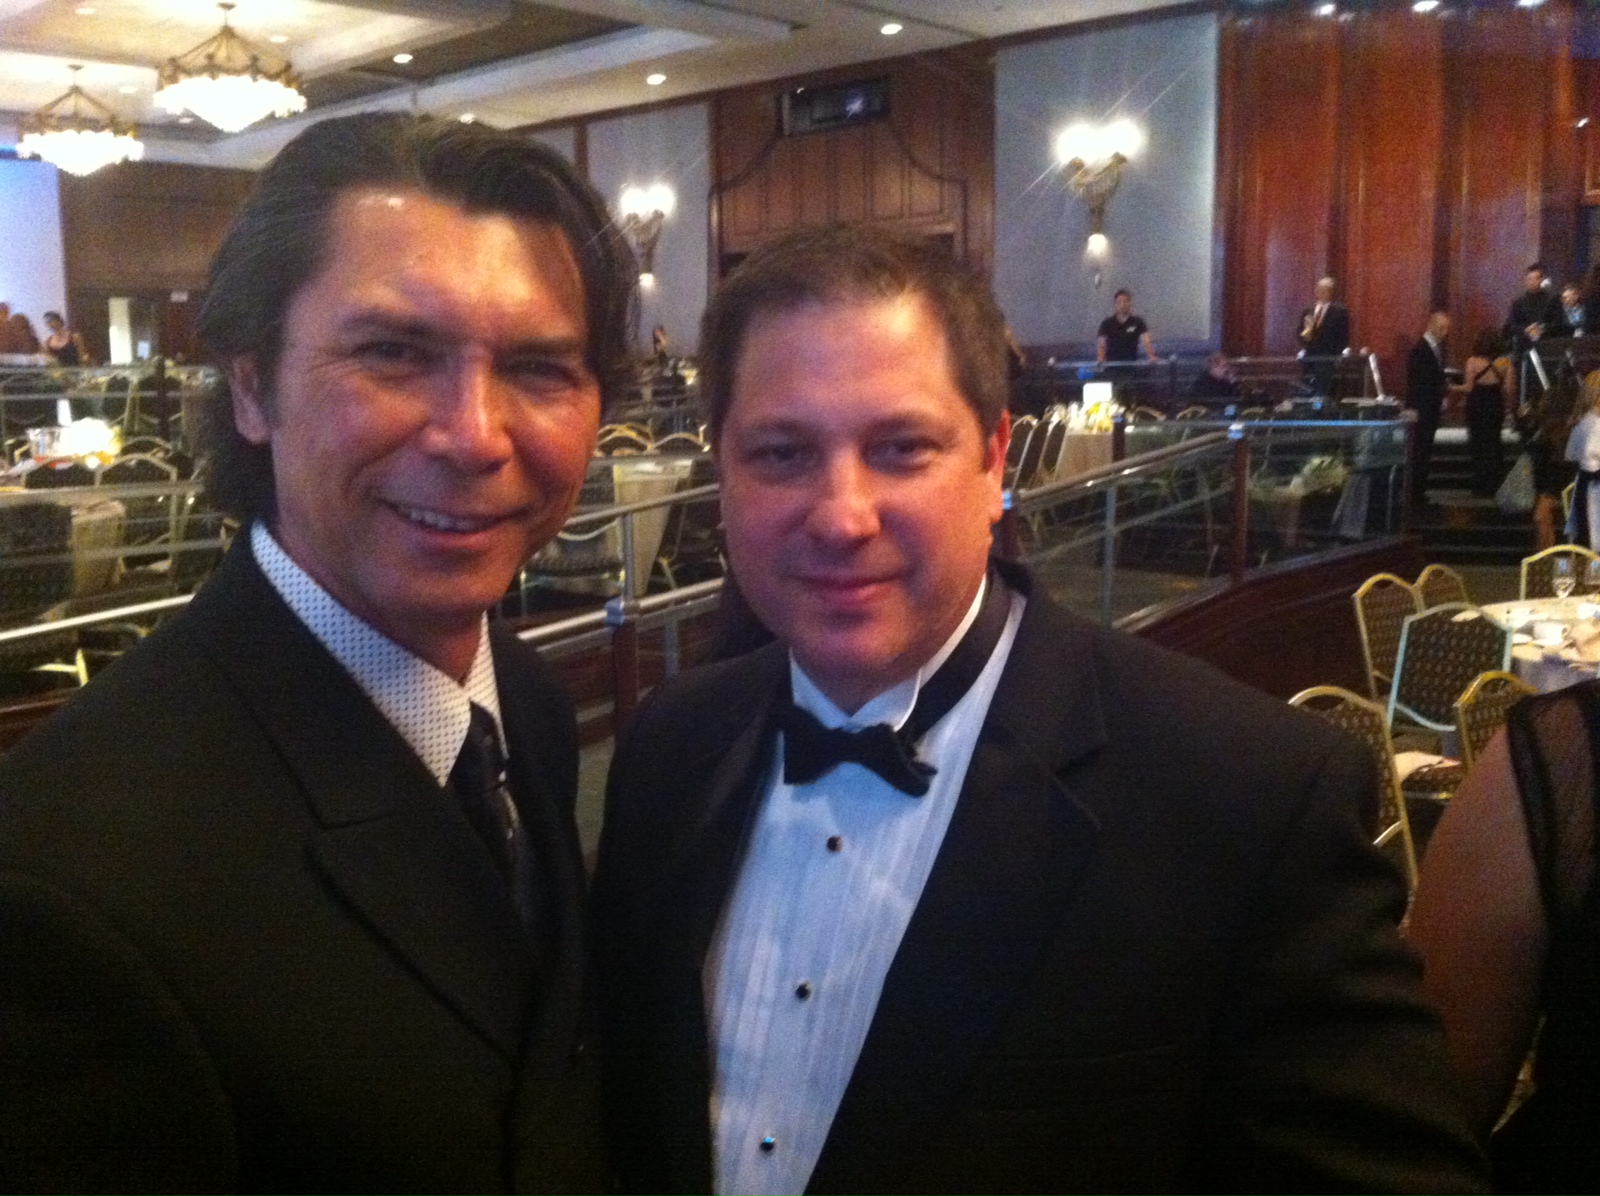 Lou Diamond Phillips, and I at the 67th Annual Directors Guild Awards.